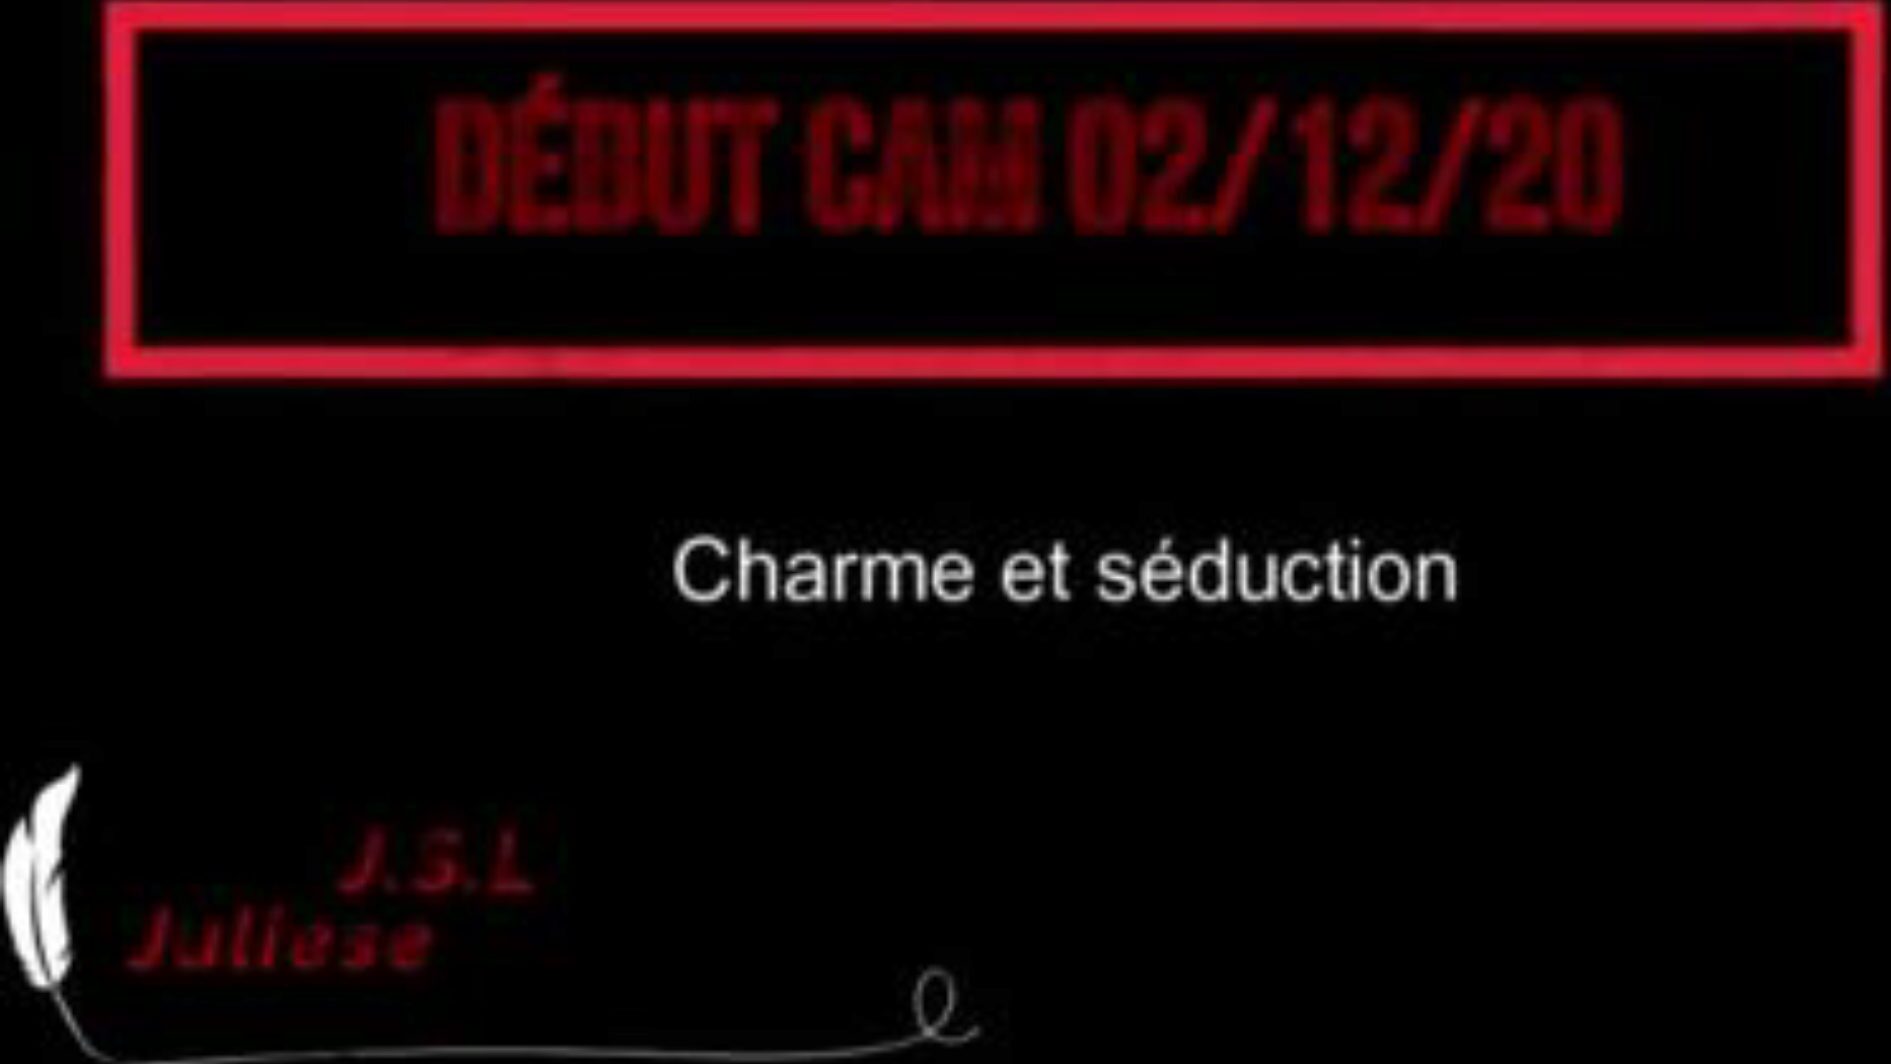 Debut Live MILF Charming Seduction, Free Porn 9d: xHamster Watch Debut Live mother I'd like to fuck Charming Seduction episode on xHamster, the fattest HD romp tube web resource with tons of free-for-all French MILF List & Amateur porn episodes